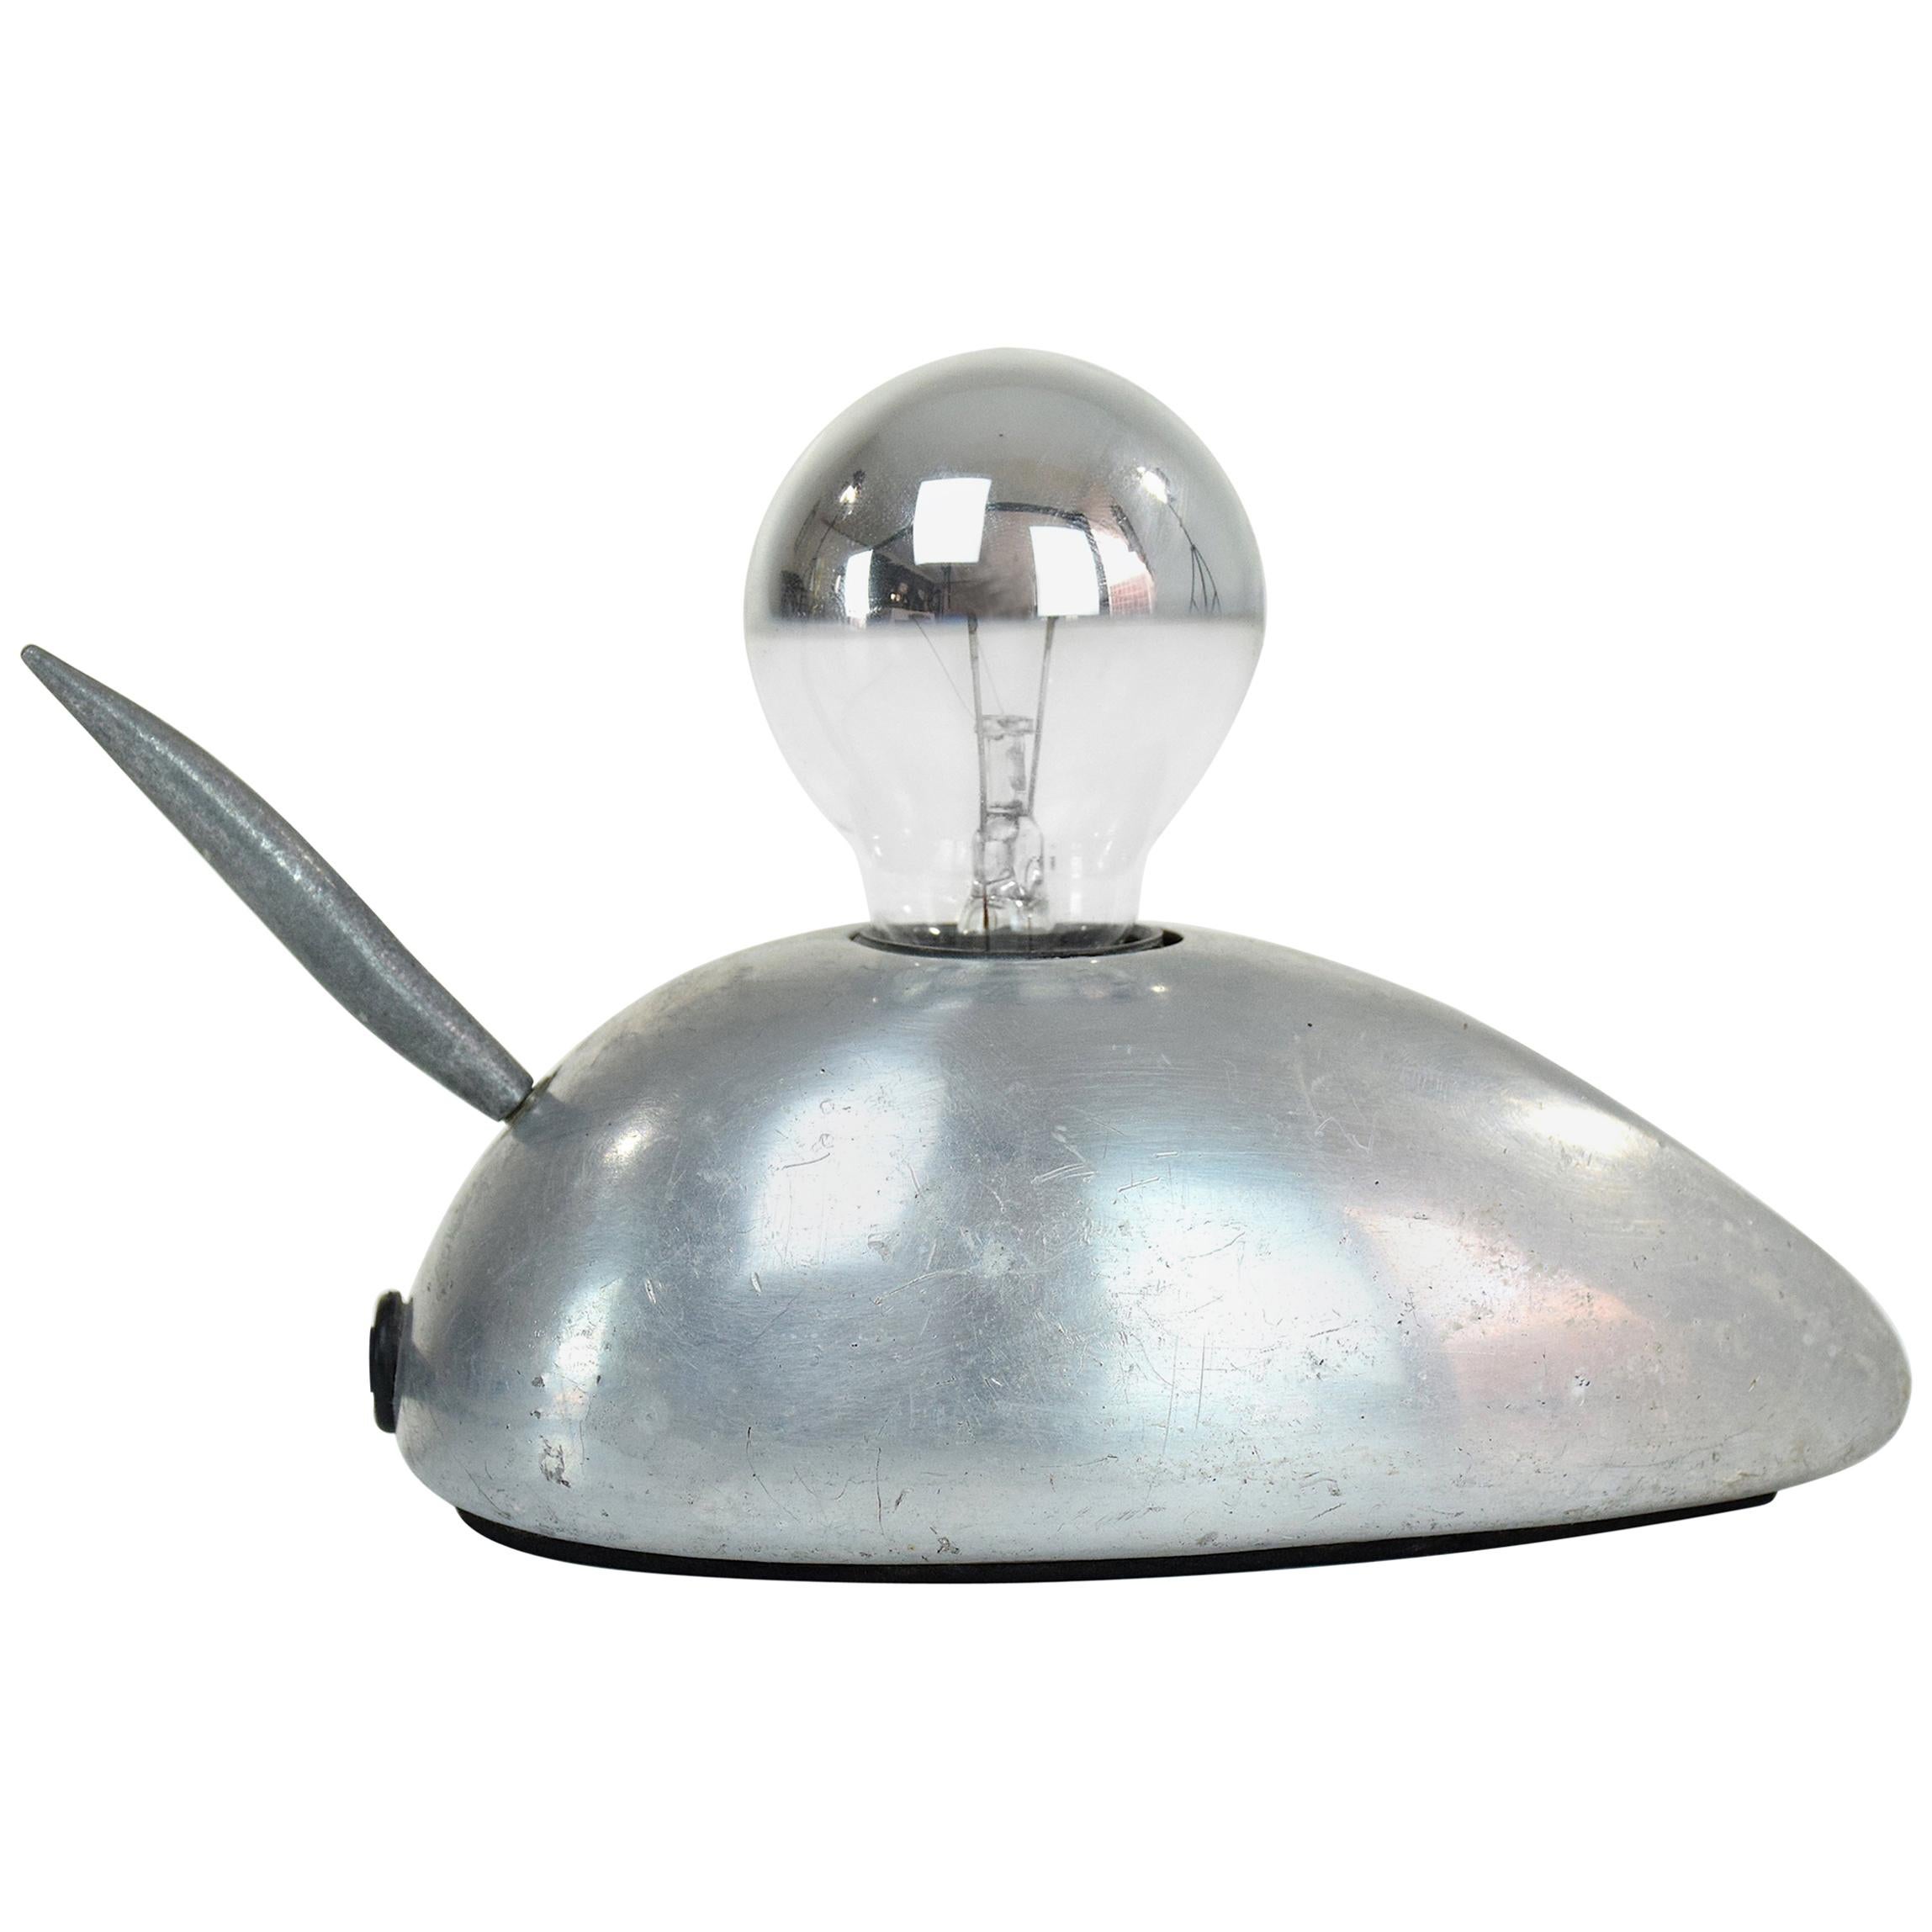 An original 20th century vintage design miniature table lamp in the shape of a mouse composed out of steel with the tail acting as a light switch. Could be considered as an accent decorative object, a reading lamp or night light. Circa